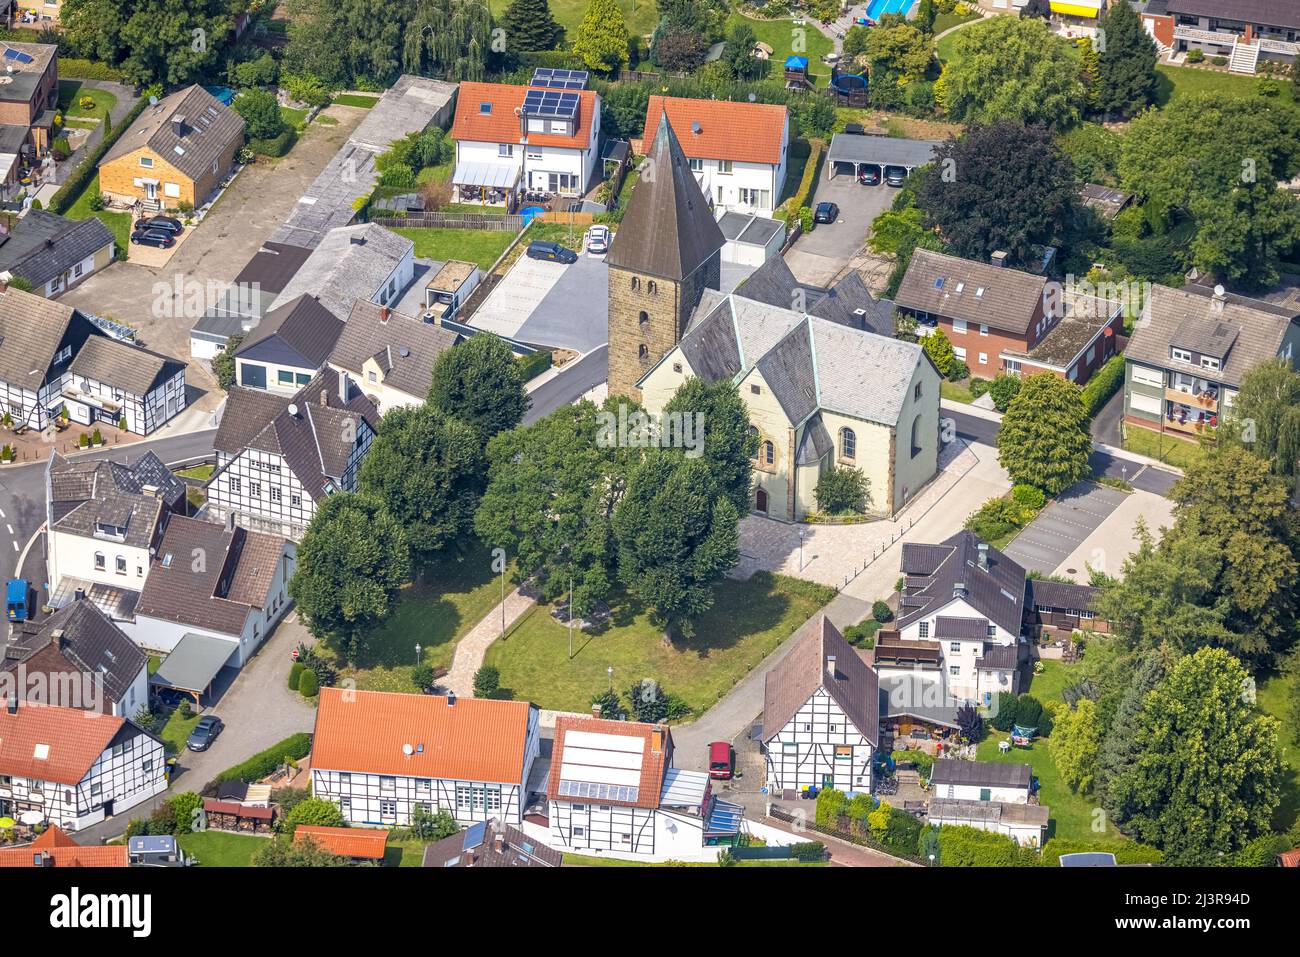 Aerial photograph, Evangelical Lutheran Church of St. Margaret in the district of Methler, Kamen, Ruhr area, North Rhine-Westphalia, Germany, place of Stock Photo